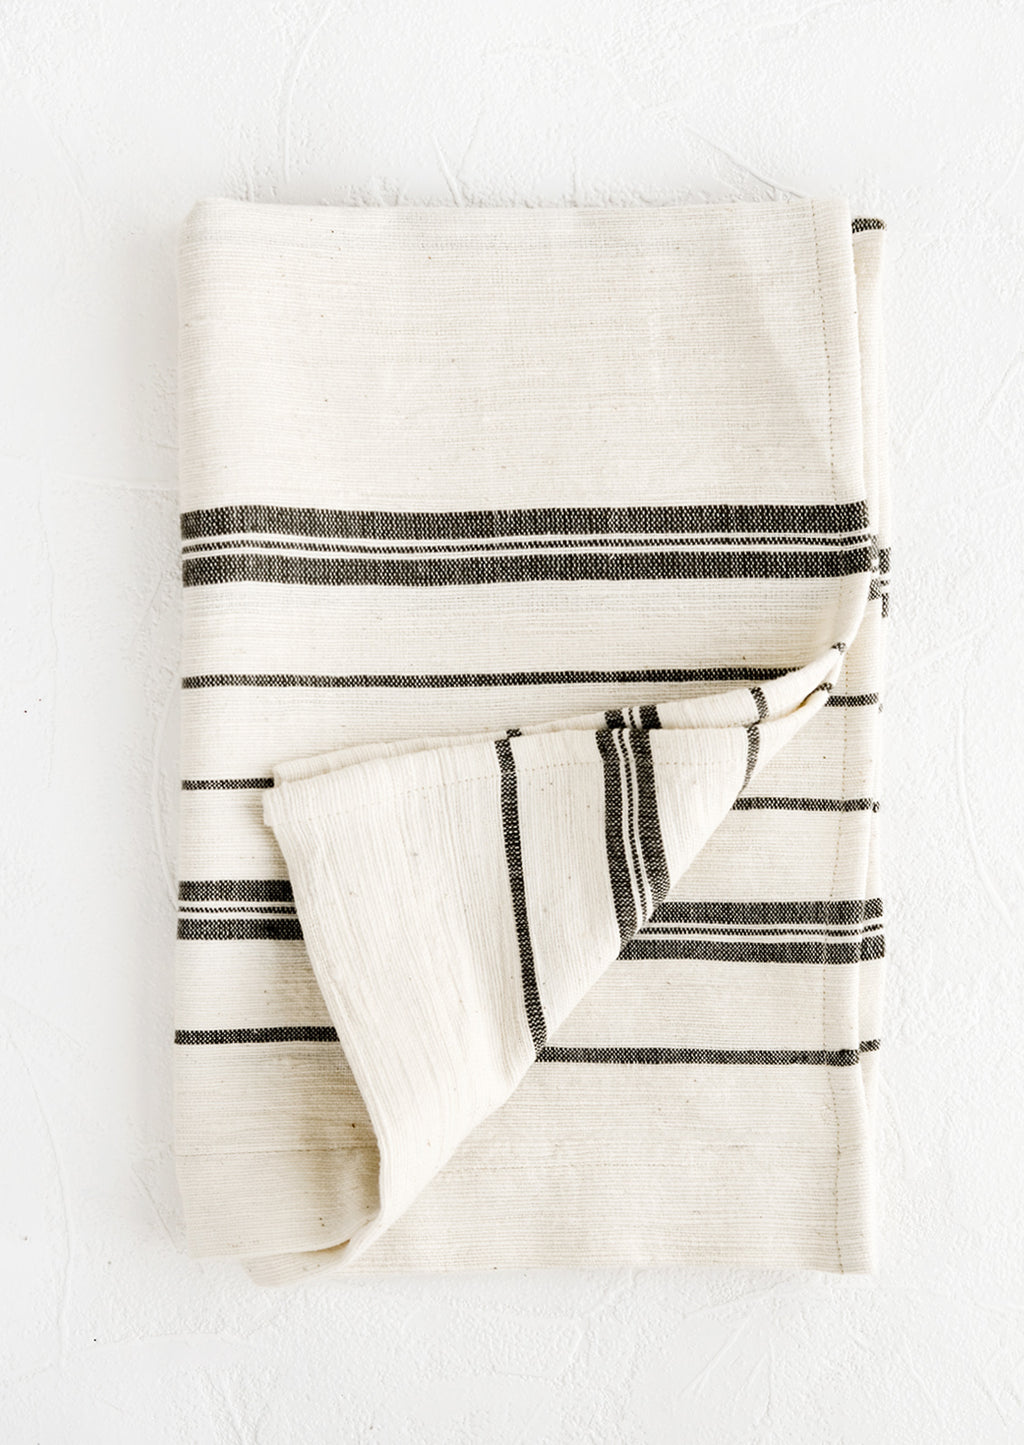 Charcoal: A folded natural cotton hand towel with black stripes.